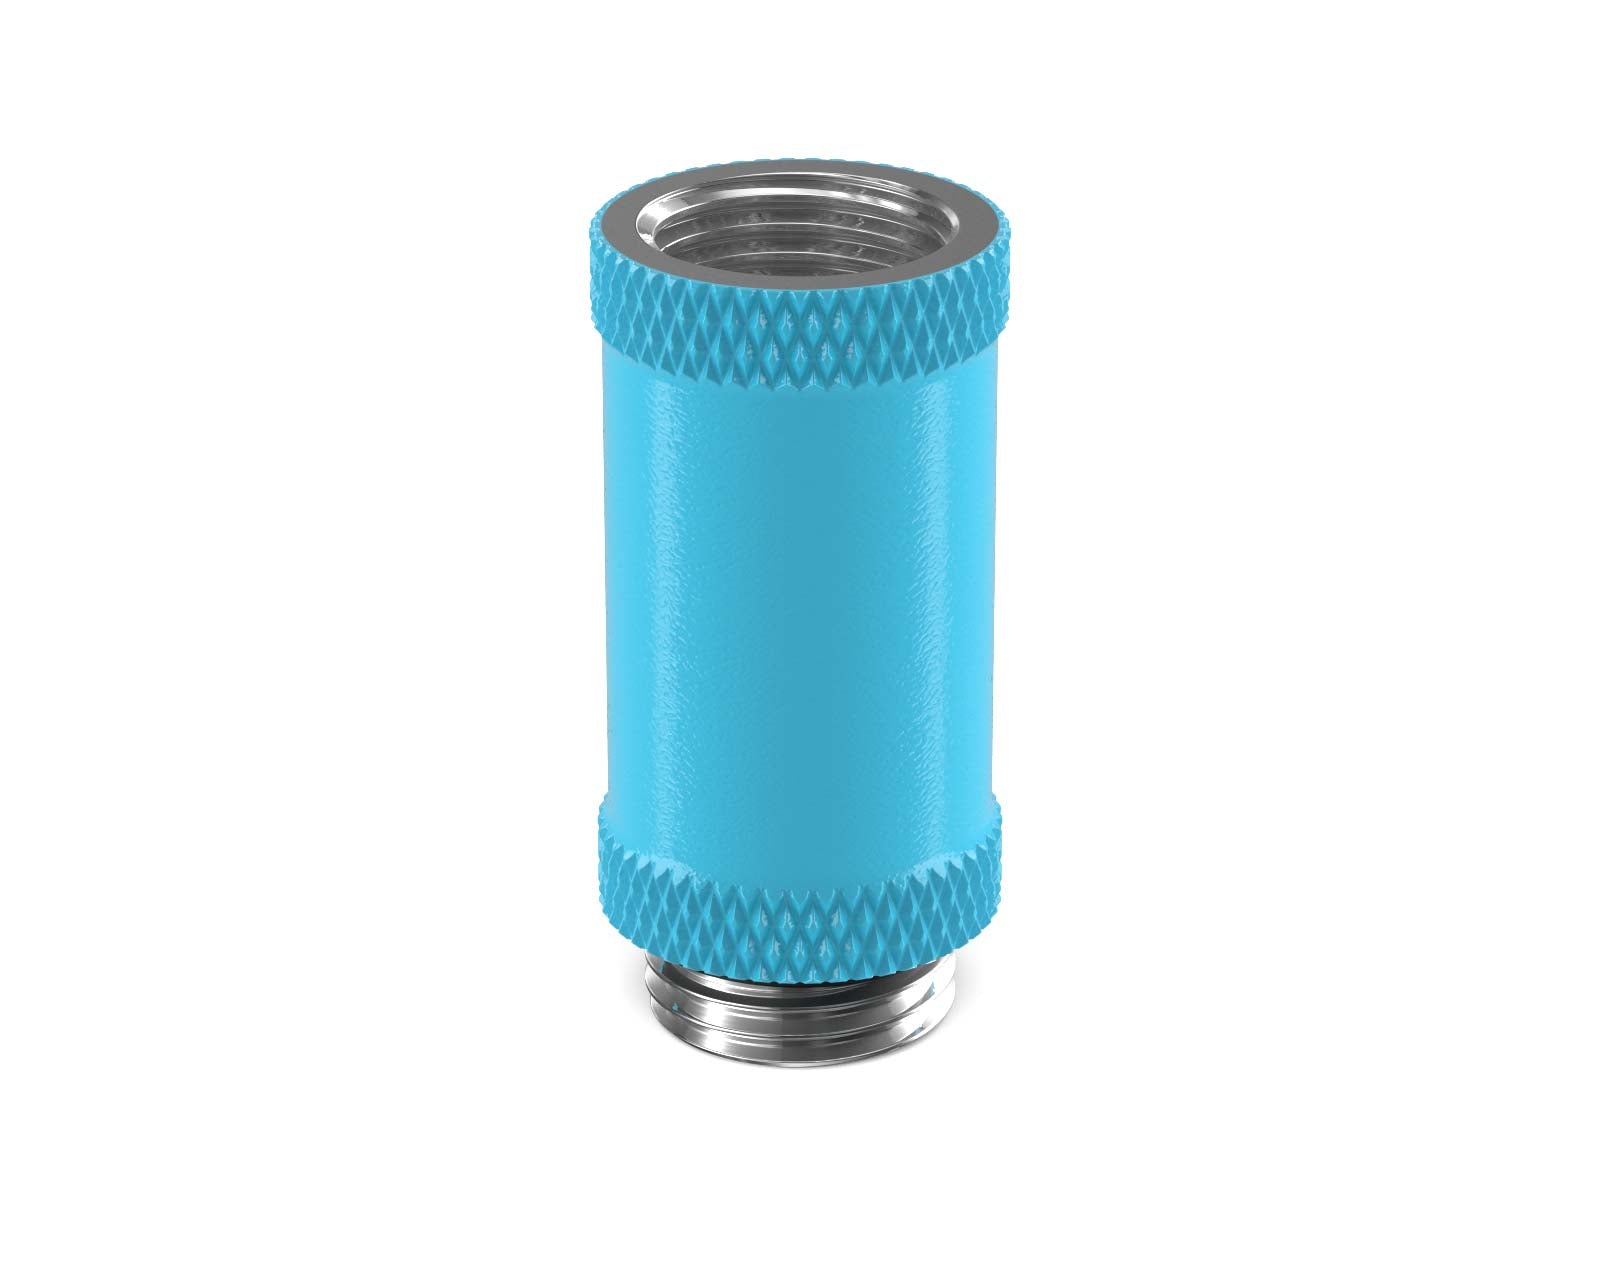 PrimoChill Male to Female G 1/4in. 30mm SX Extension Coupler - PrimoChill - KEEPING IT COOL Sky Blue